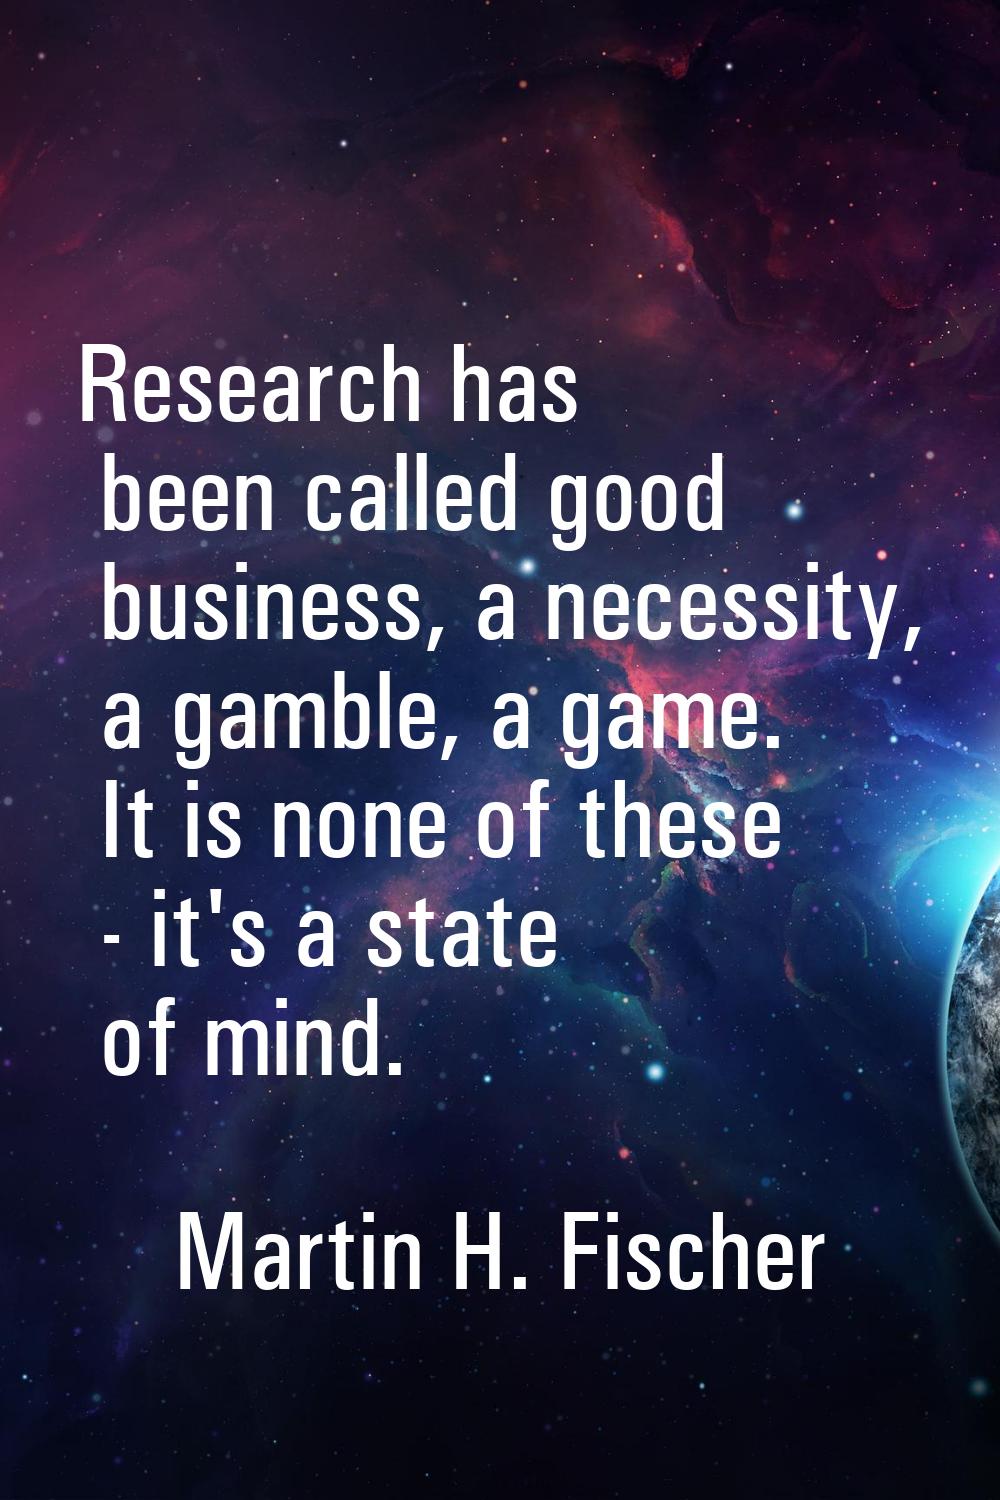 Research has been called good business, a necessity, a gamble, a game. It is none of these - it's a